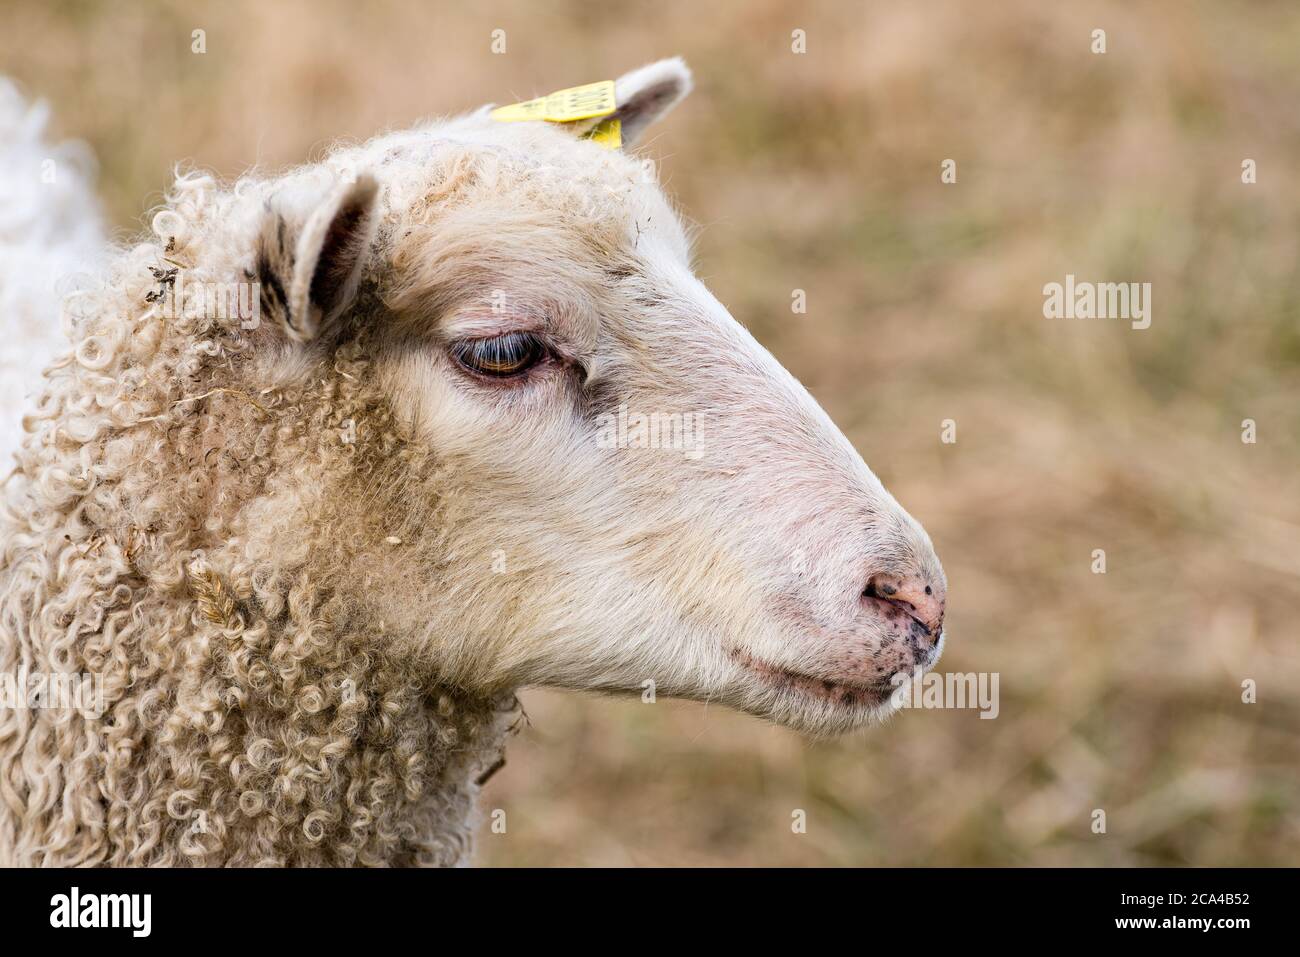 Domestic sheep (Ovis aries) are quadrupedal, ruminant mammals typically kept as livestock. Stock Photo